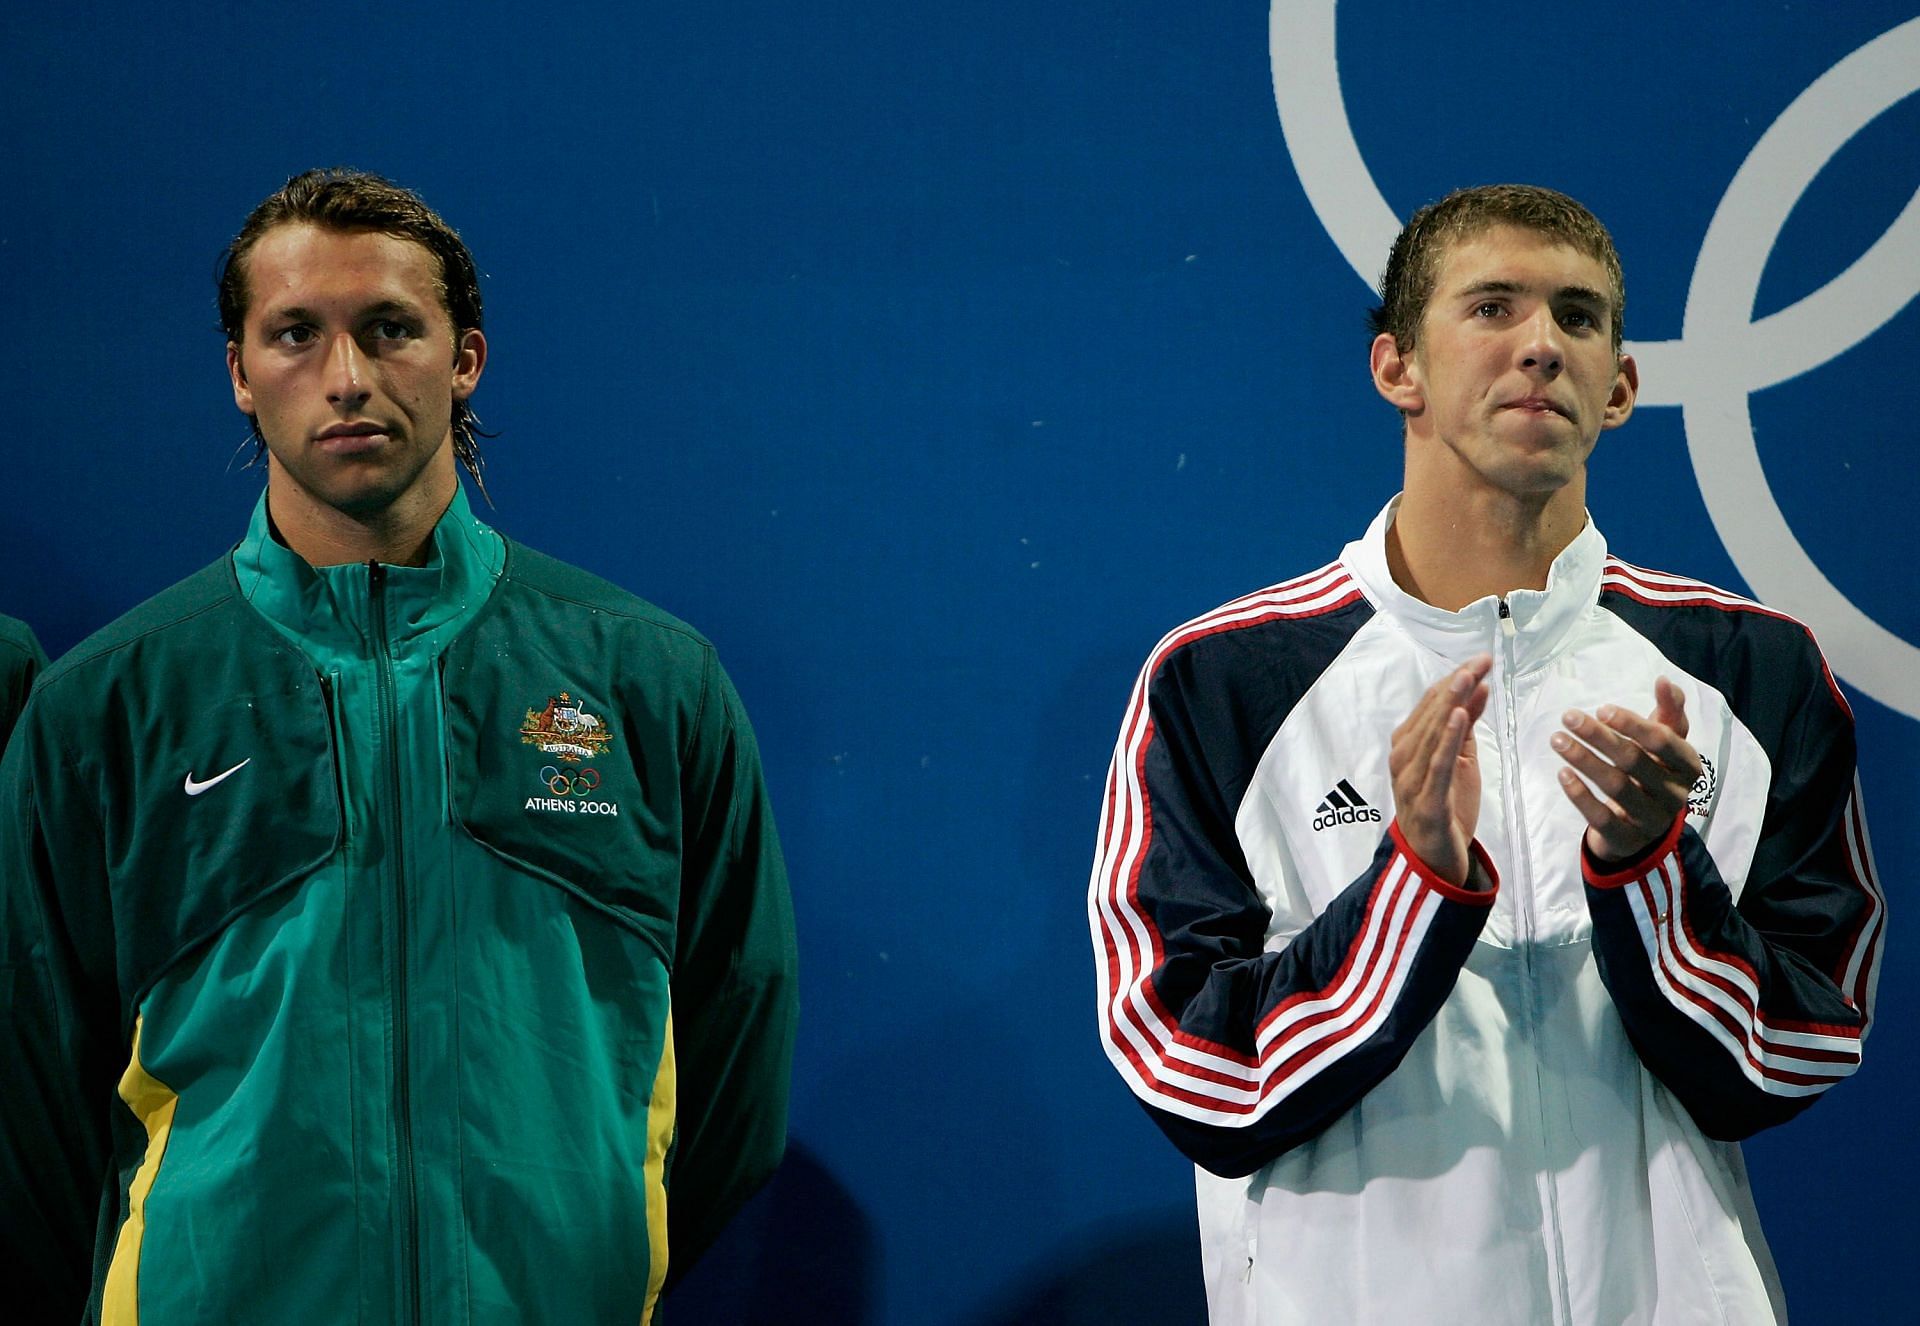 Ian Thorpe and Phelps in 2004 Olympics at the Mens 4x200m Free Relay Medal Ceremony